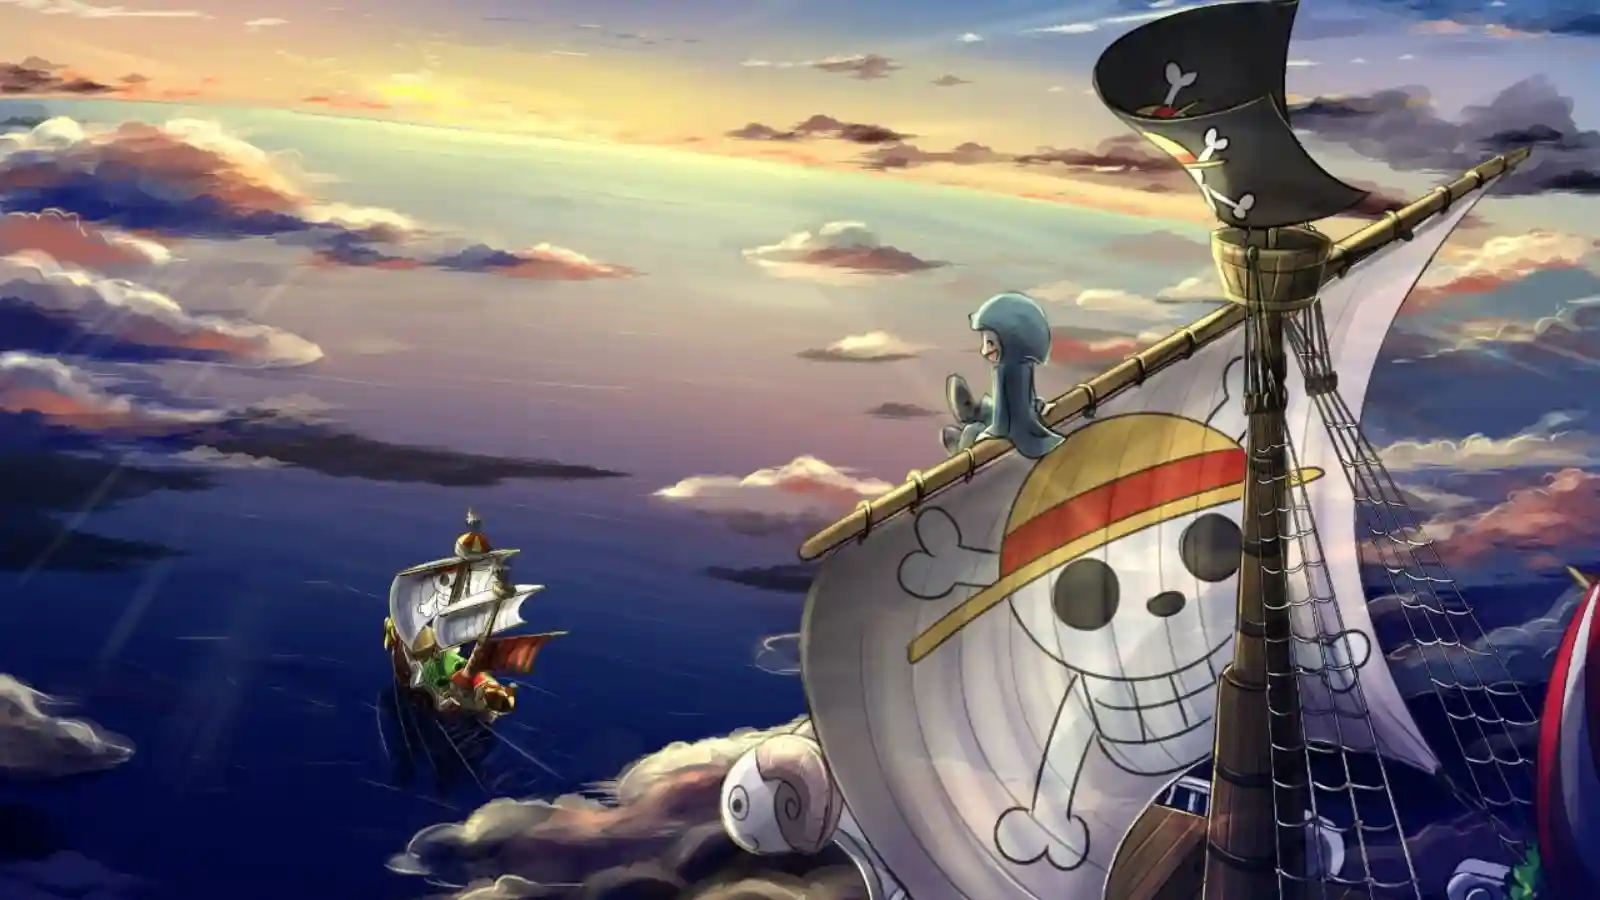 What Is A Klabautermann In 'One Piece'? Was There Any Relationship Between  Going Merry And Thousand Sunny? - FirstCuriosity